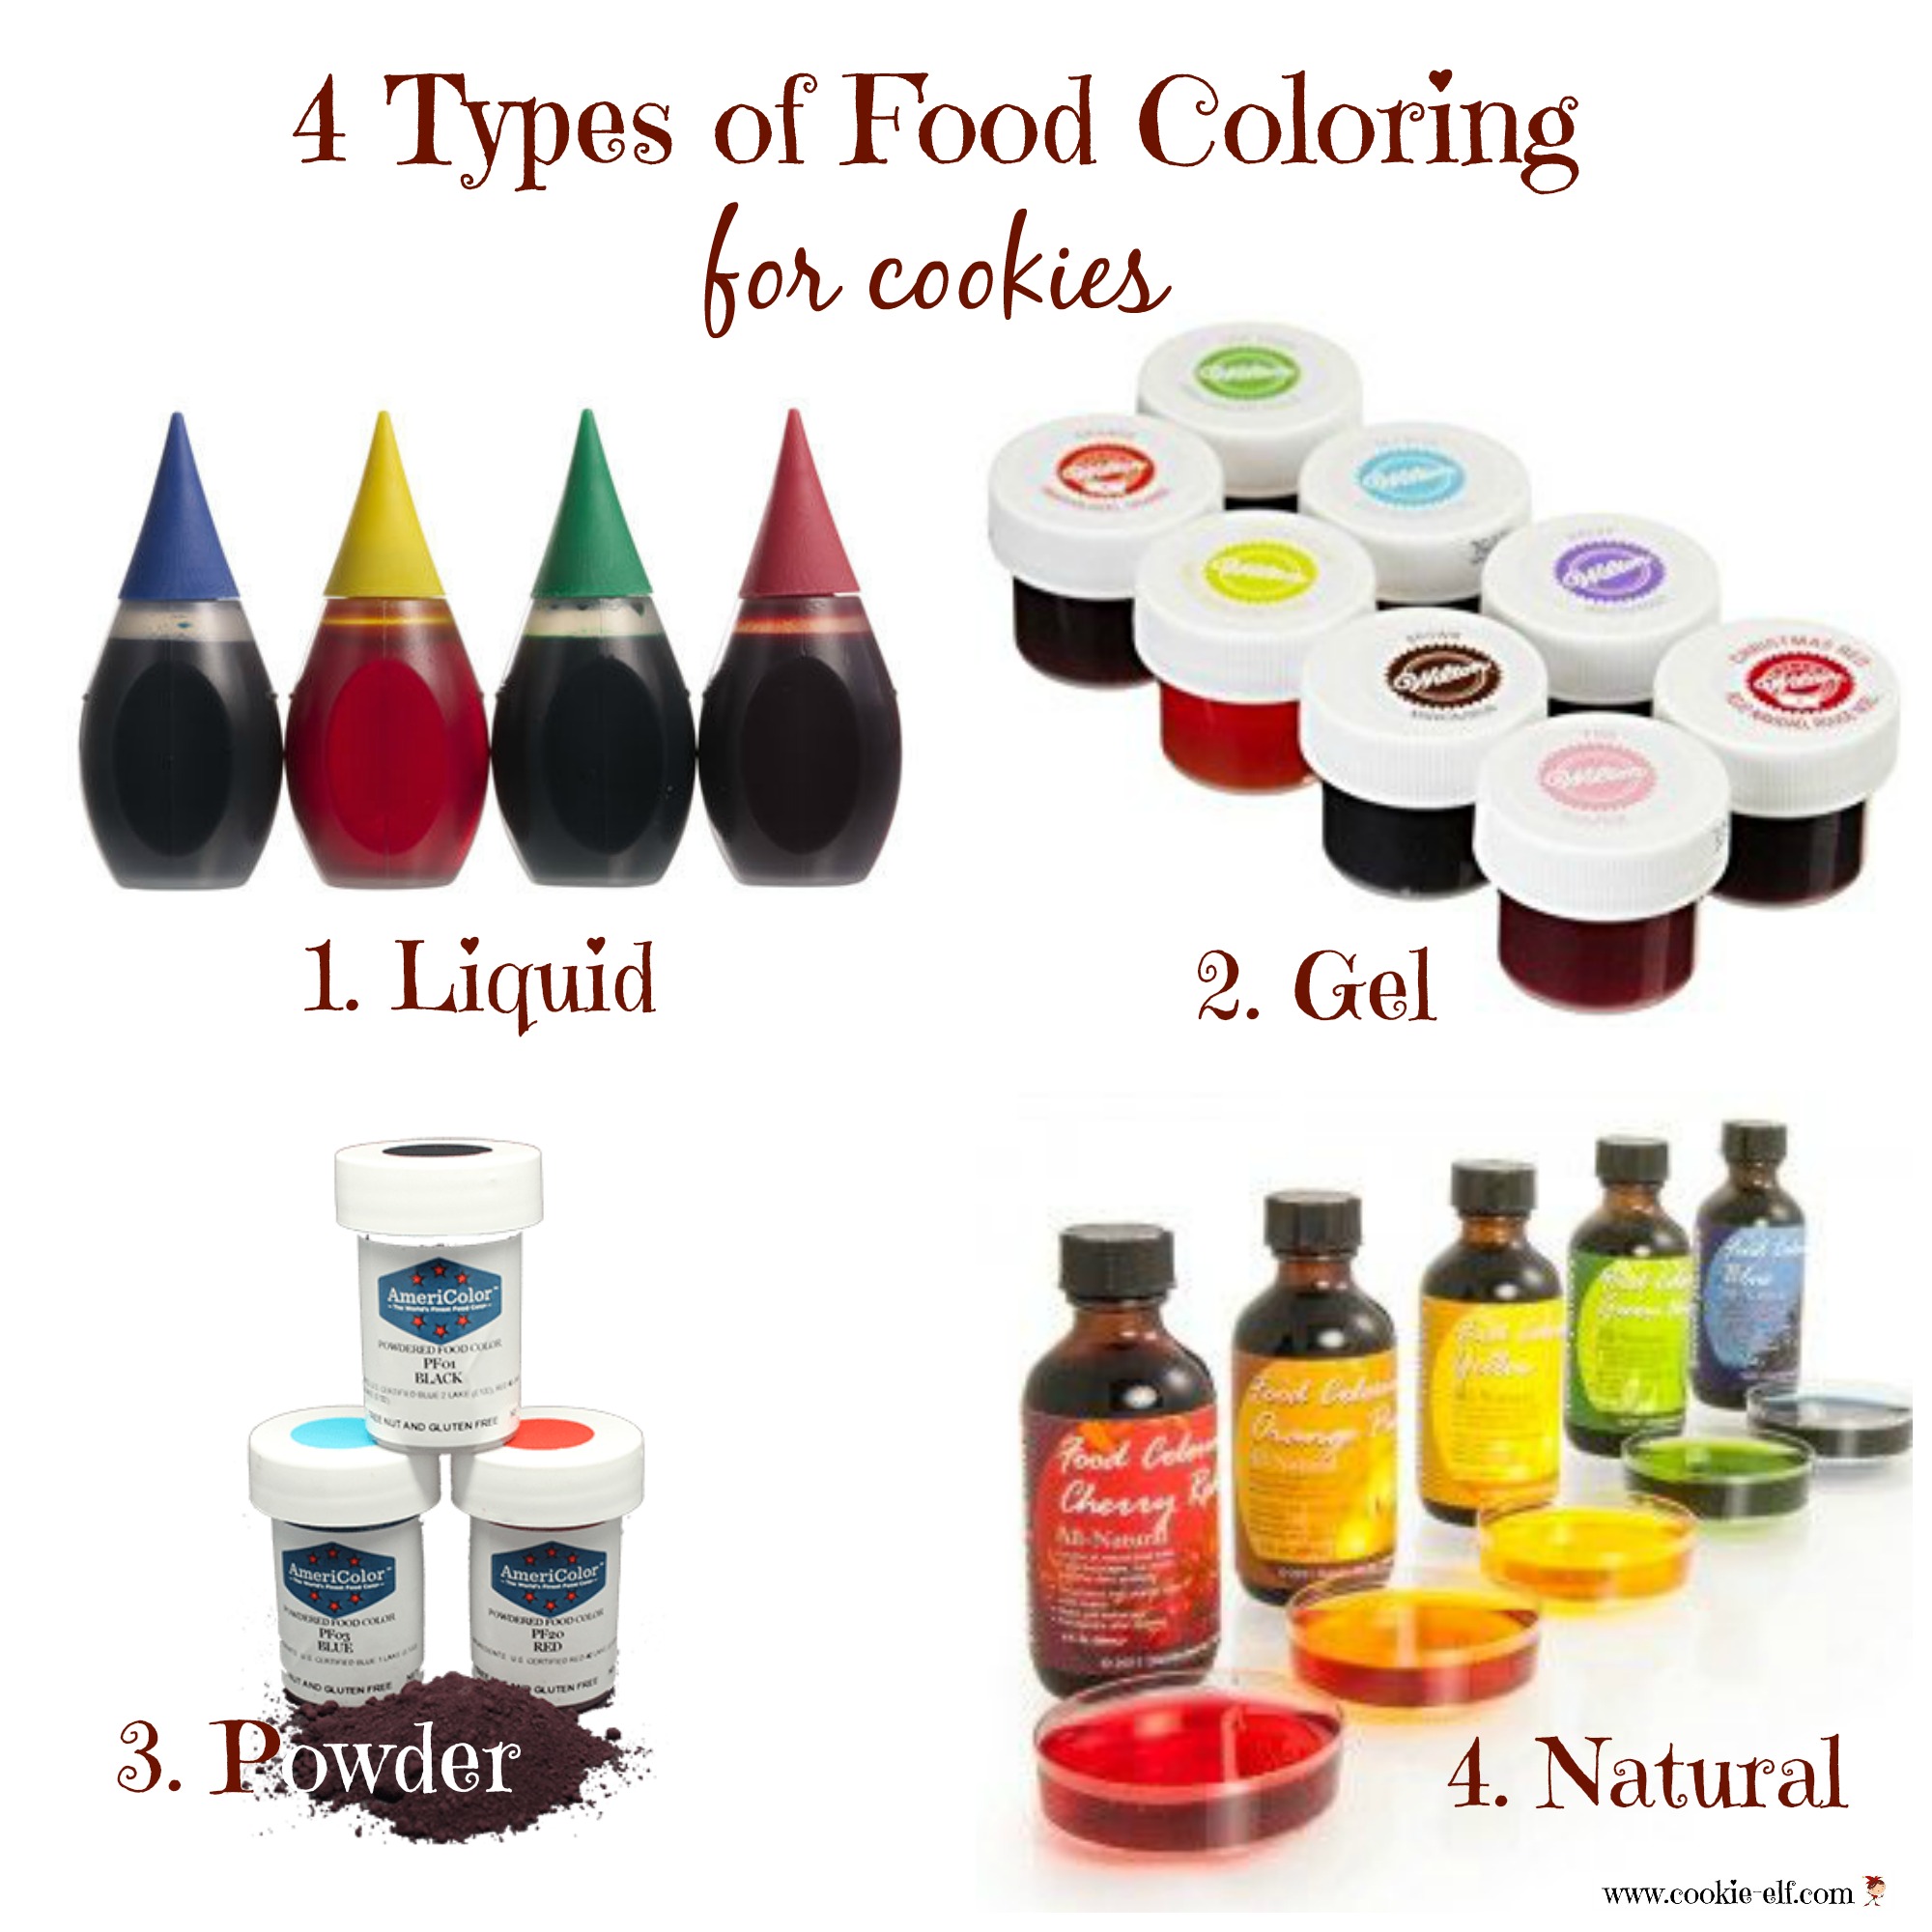 How to Make Natural Food Coloring for Christmas Baking